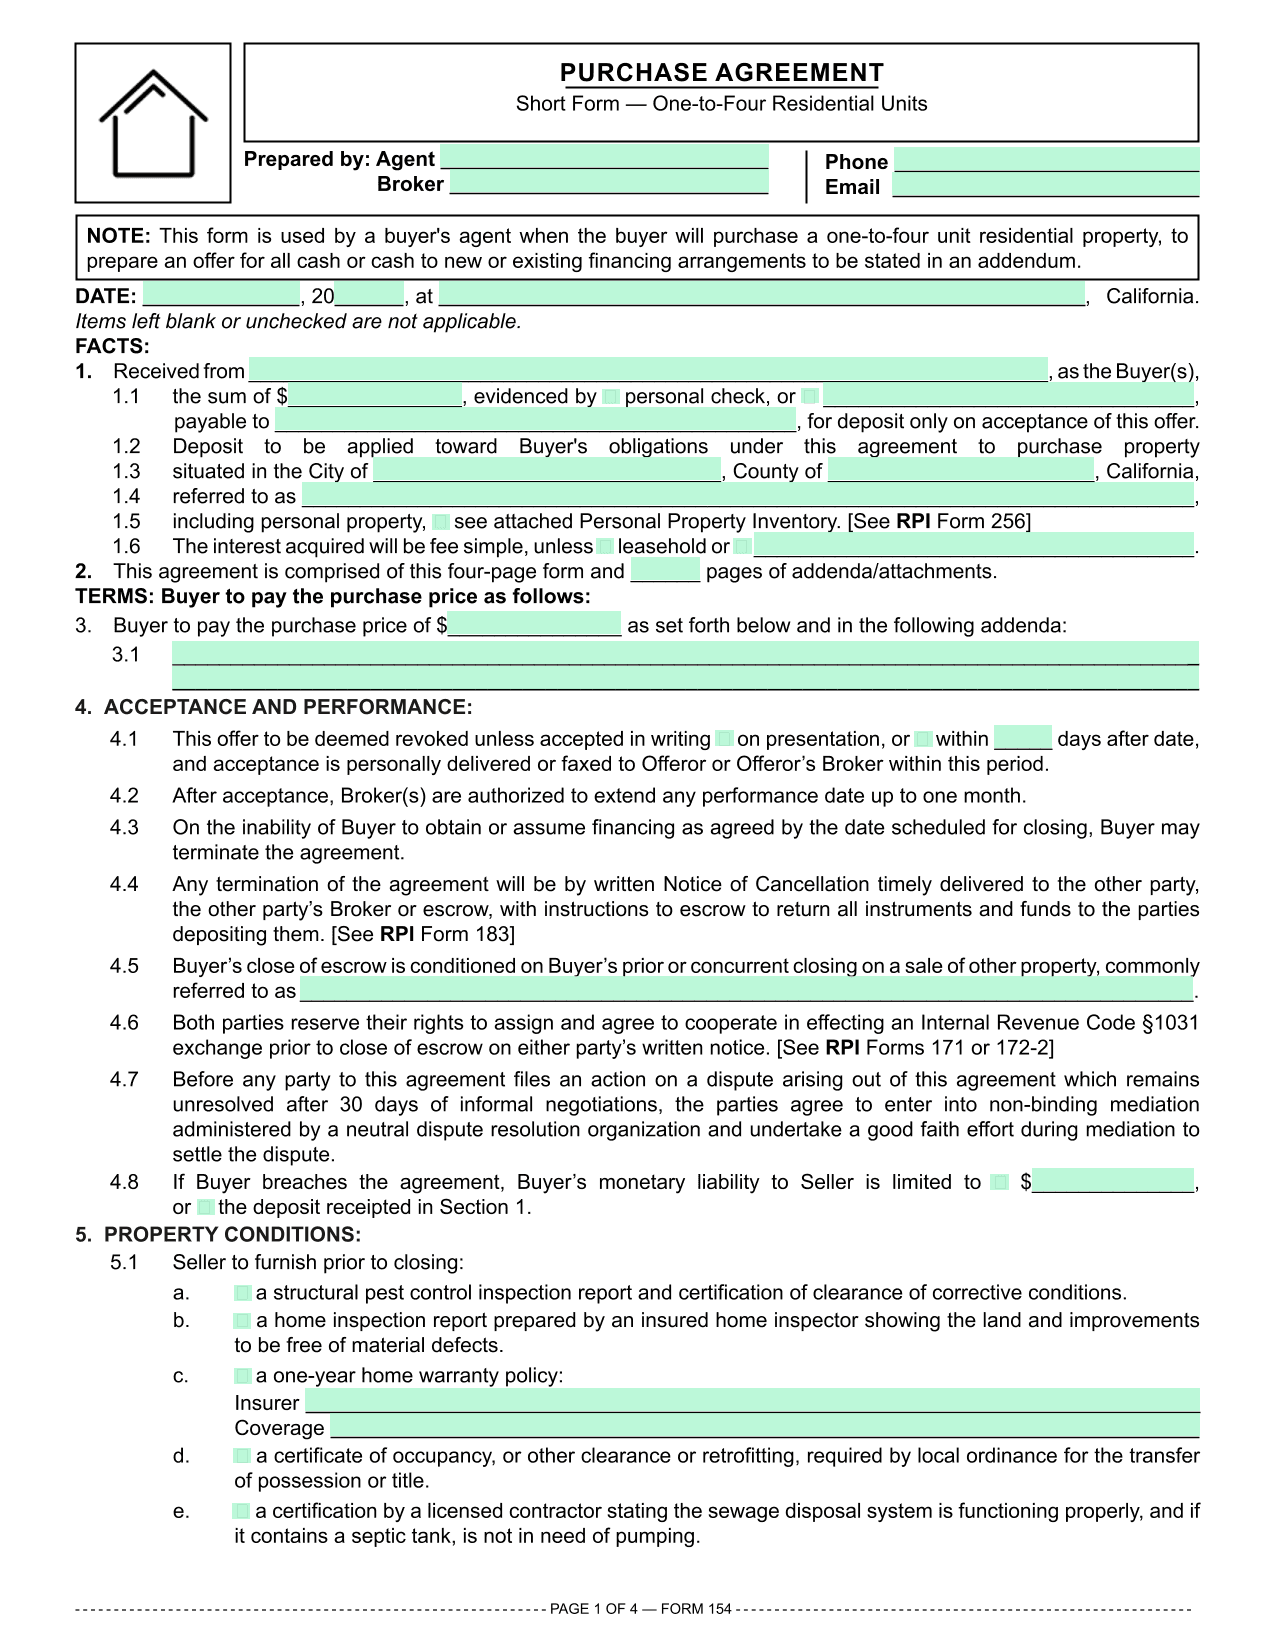 Residential Purchase Agreement (RPI 154) screenshot